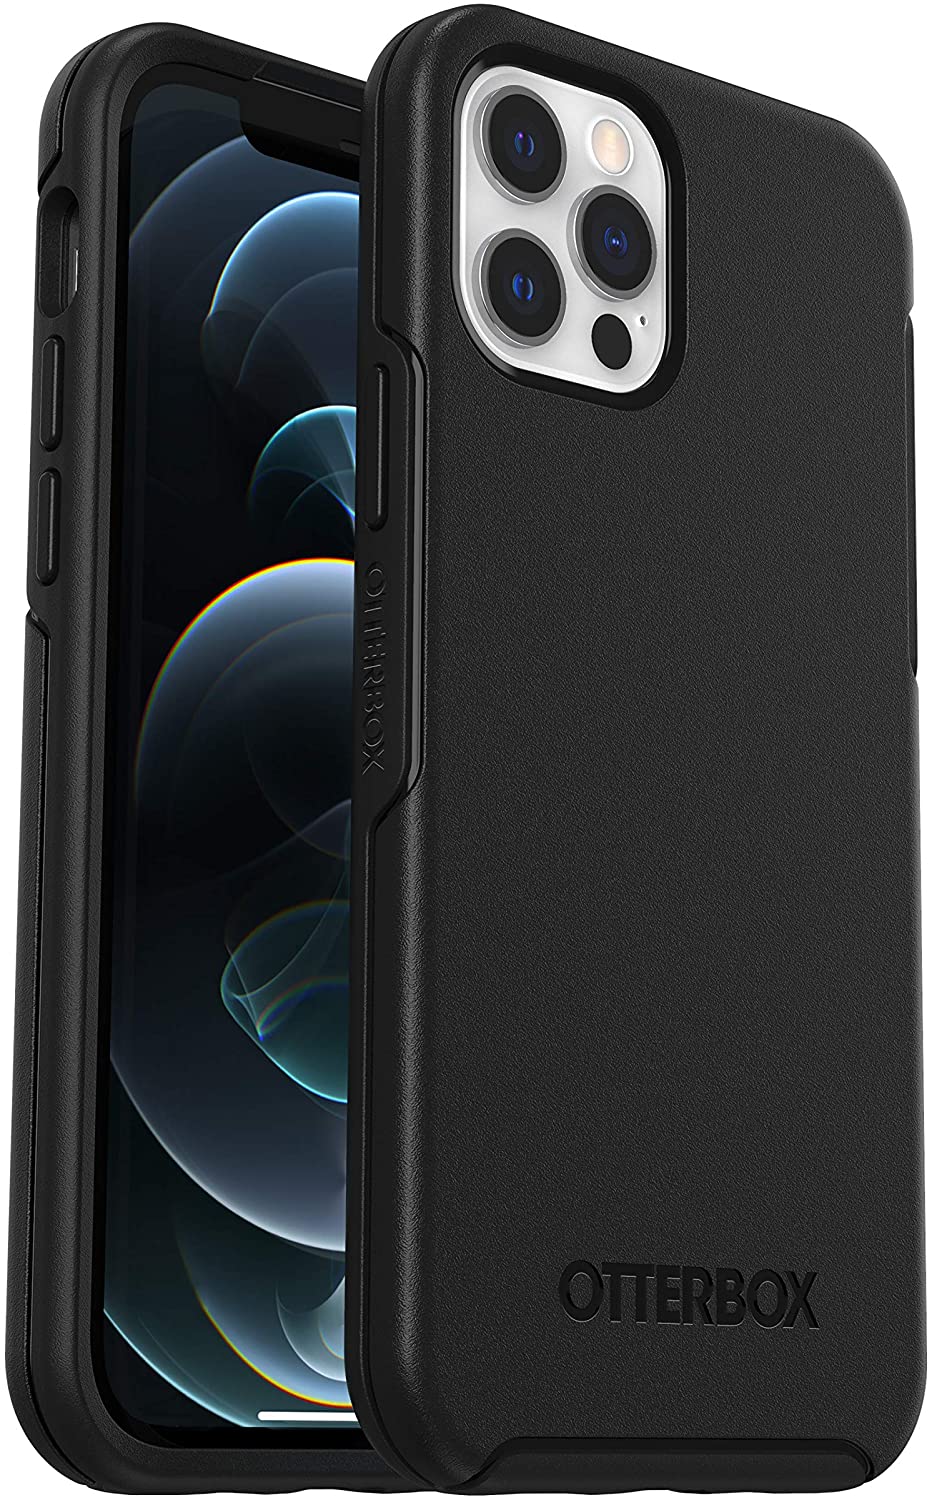 OtterBox SYMMETRY SERIES Case for Apple iPhone 12/12 Pro - Black (Certified Refurbished)